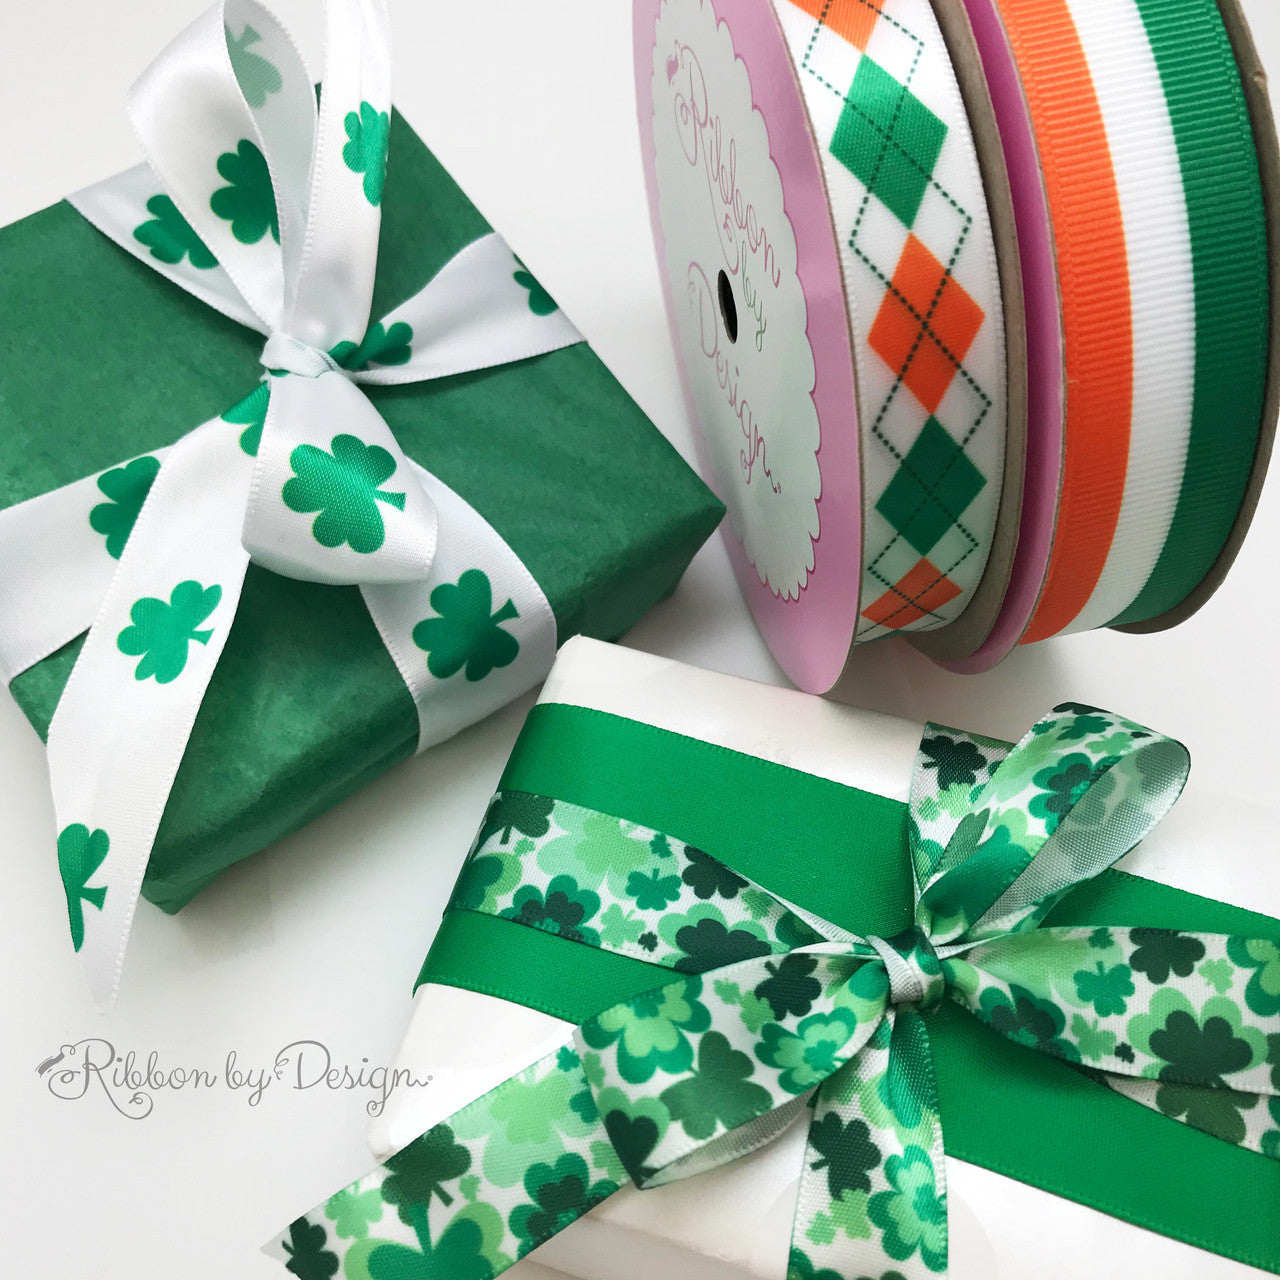 Shamrocks and argyle make the perfect pair for a St. Patrick's Day celebration.